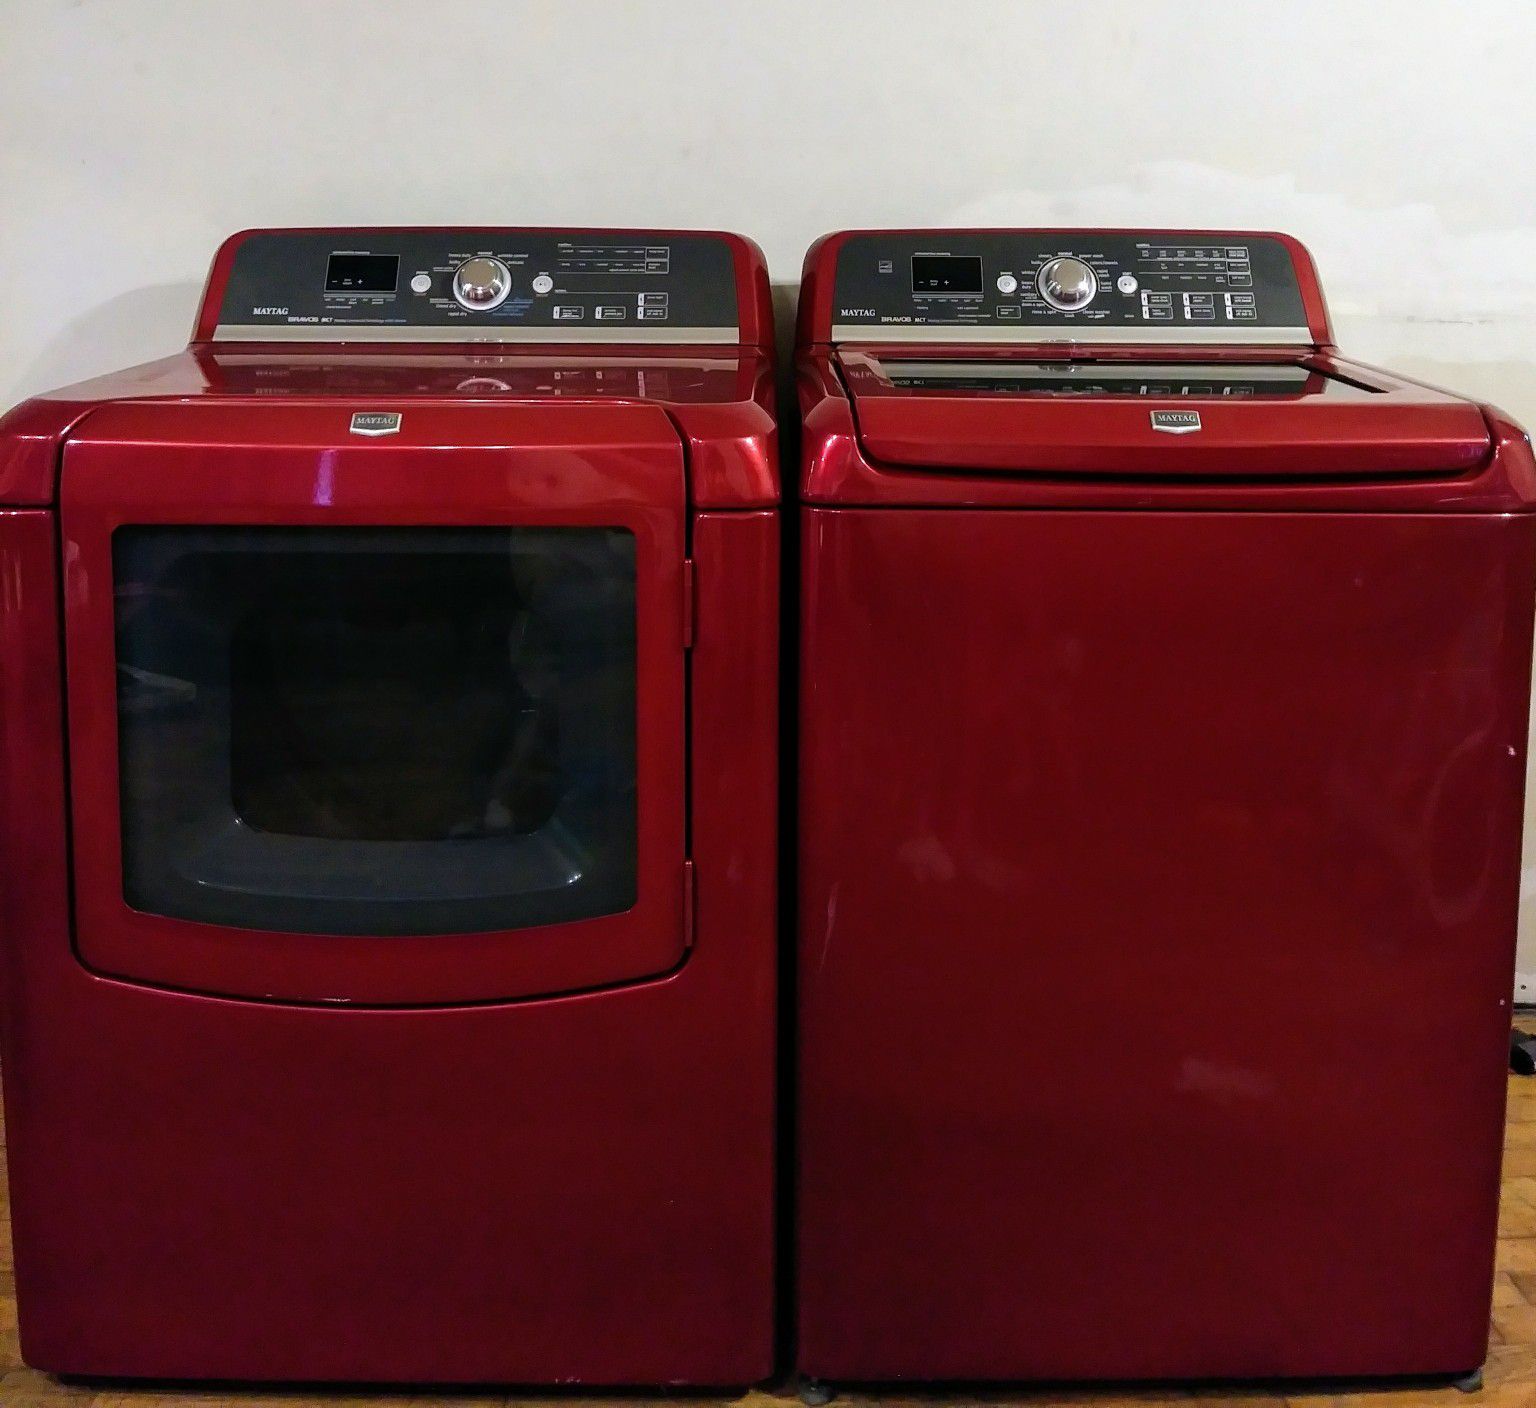 Cherry Red Washer And Dryer